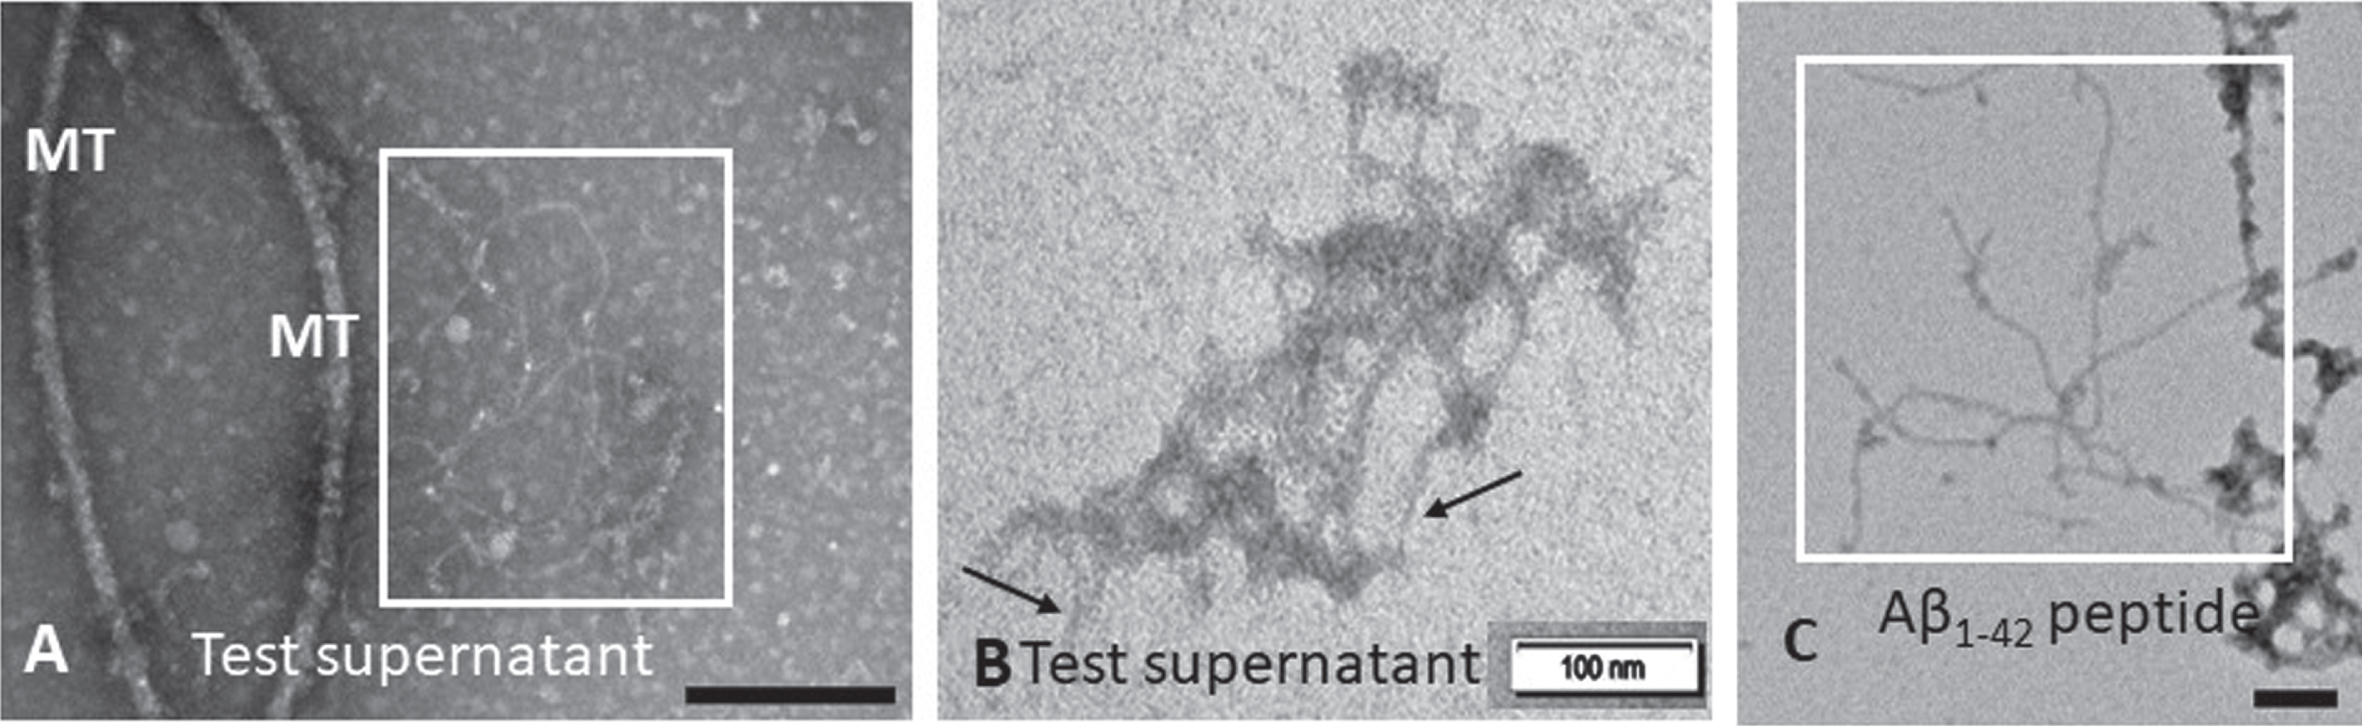 TEM detection of insoluble Aβ fibrils in Pg381 treated supernatant. Examination for insoluble Aβ in the supernatant from SH-SY5Y treated with P. gingivalis crude conditioned medium (A box and B arrows) demonstrated Aβ fibrils. The boxed area in panel C shows a positive control for Aβ fibrils from a commercial peptide Aβ42 under the TEM. MT = microtubule fragments. Micron bars represent 100 nm size.